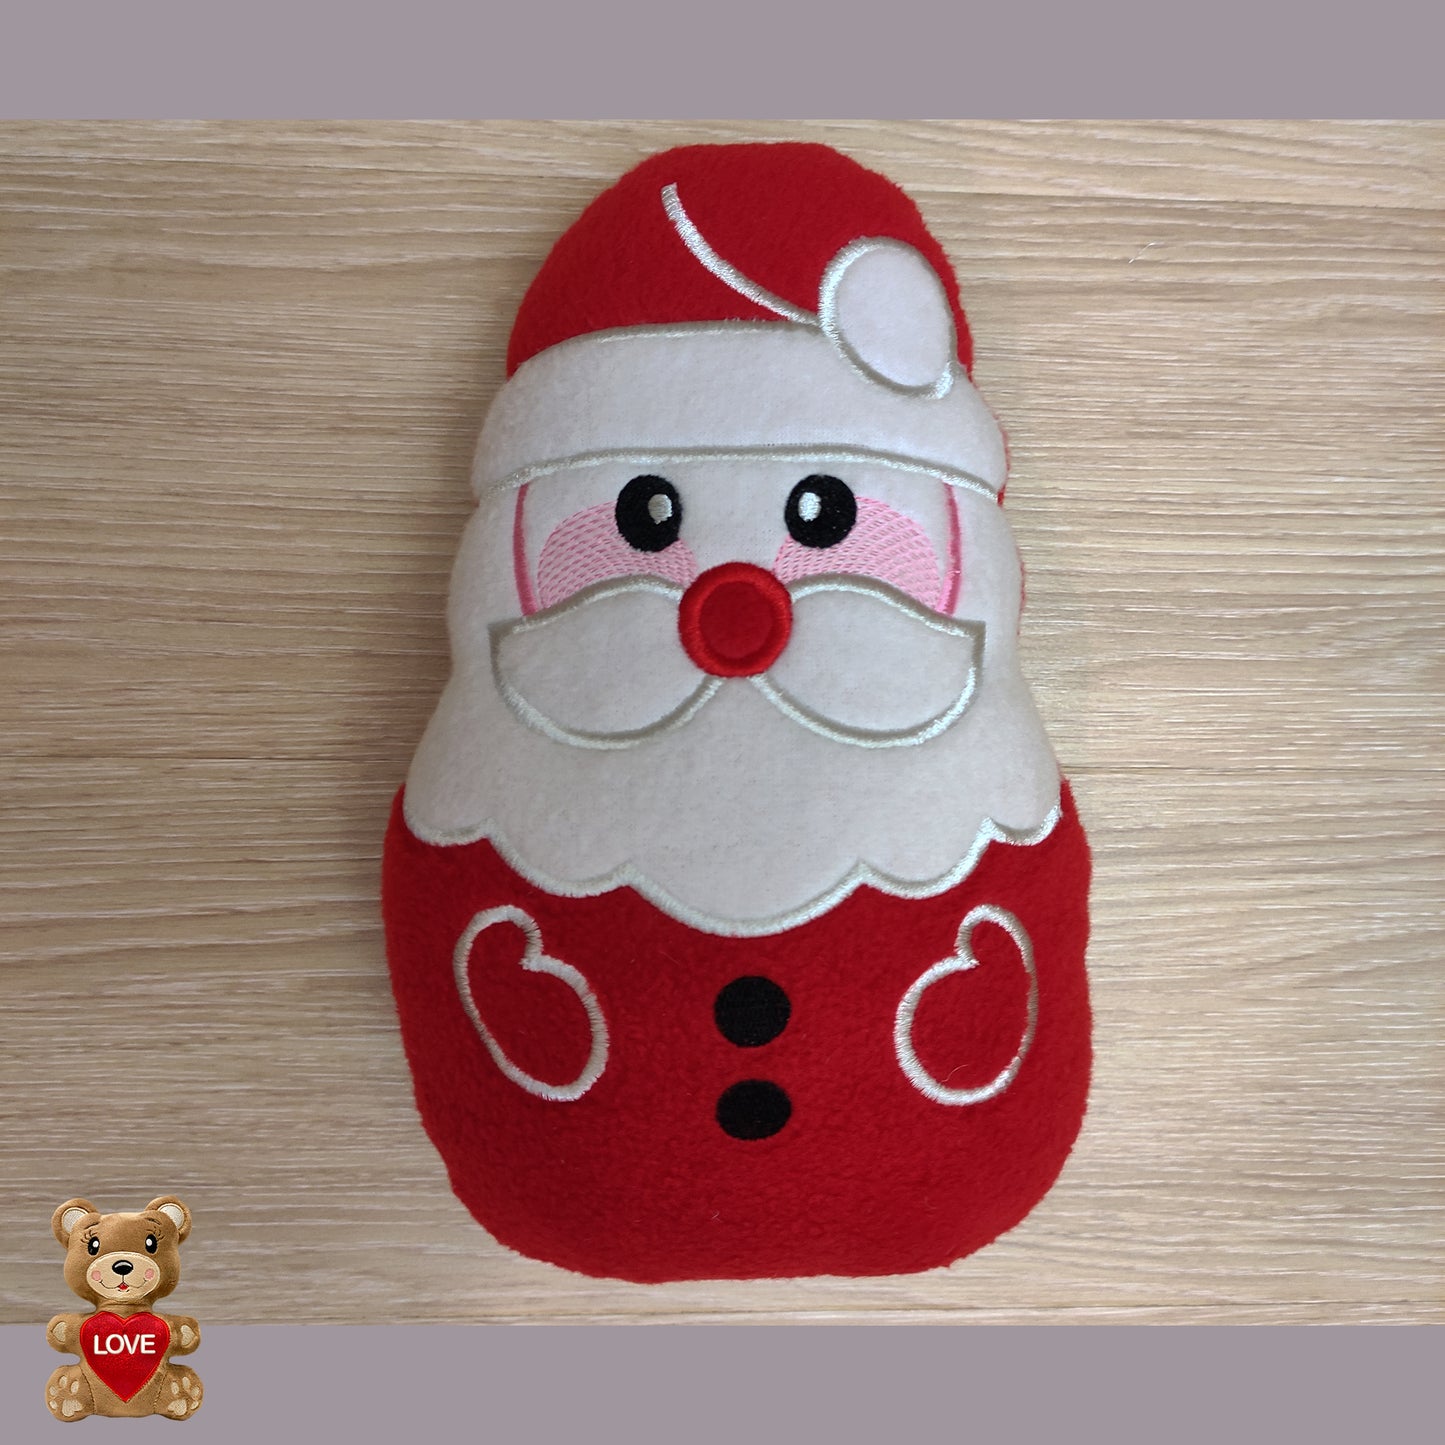 Personalised embroidery Plush Soft Toy Christmas Santa ,Super cute personalised soft plush toy, Personalised Gift, Unique Personalized Birthday Gifts , Custom Gifts For Children